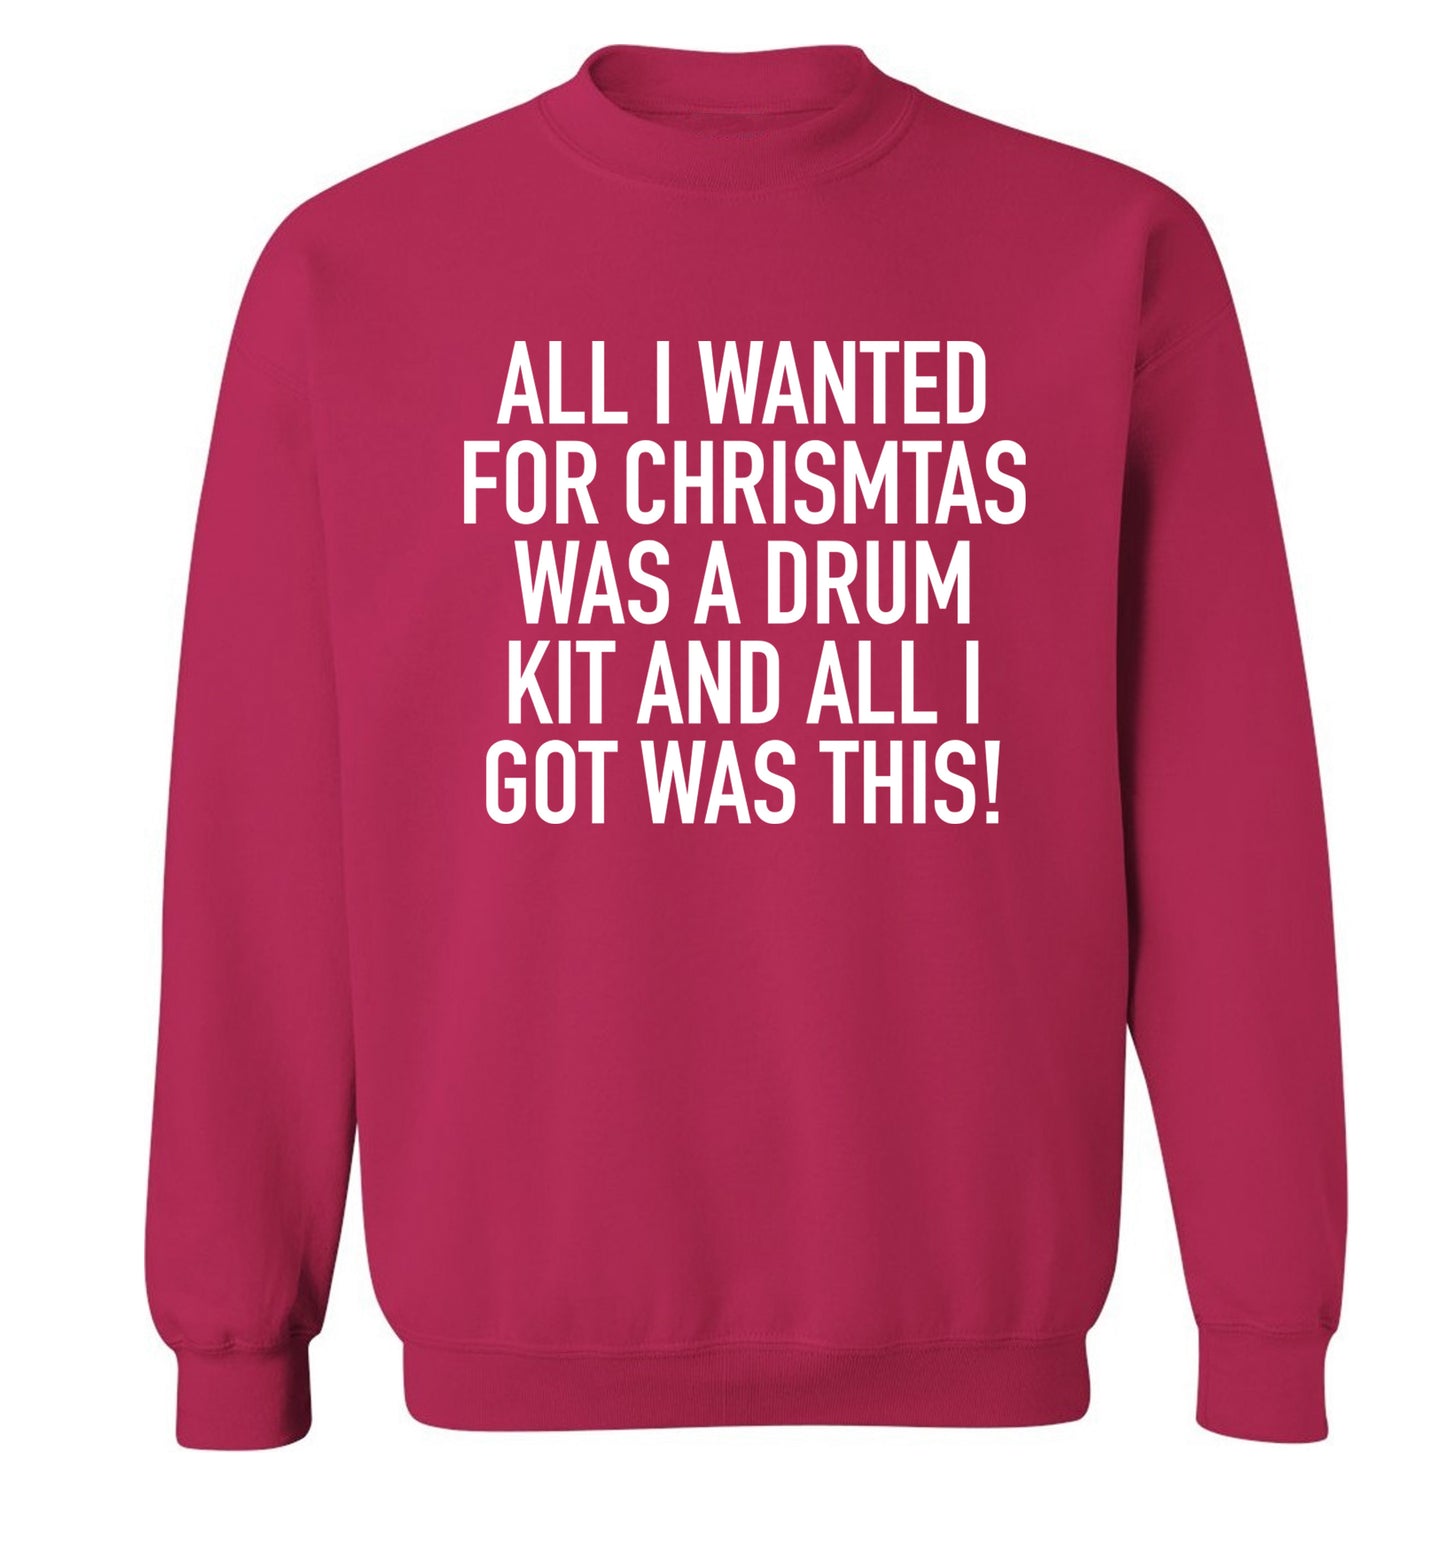 All I wanted for Christmas was a drum kit and all I got was this! Adult's unisex pink Sweater 2XL